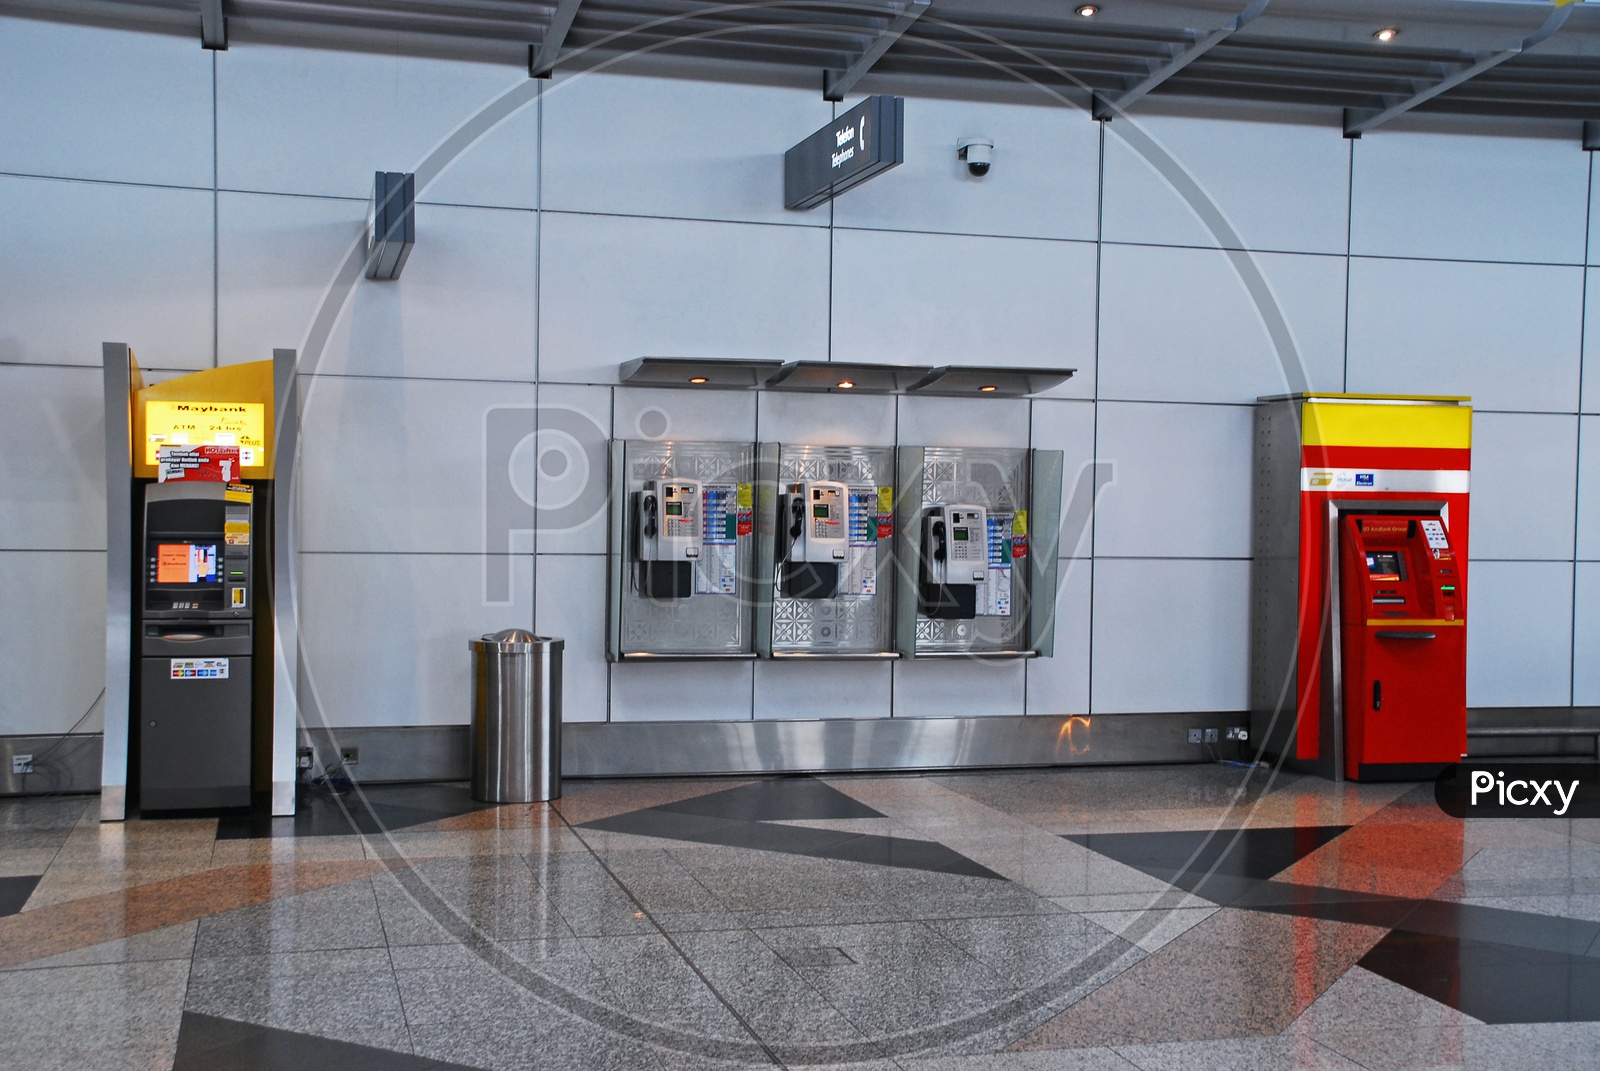 ATM machines and pay telephones in an airport